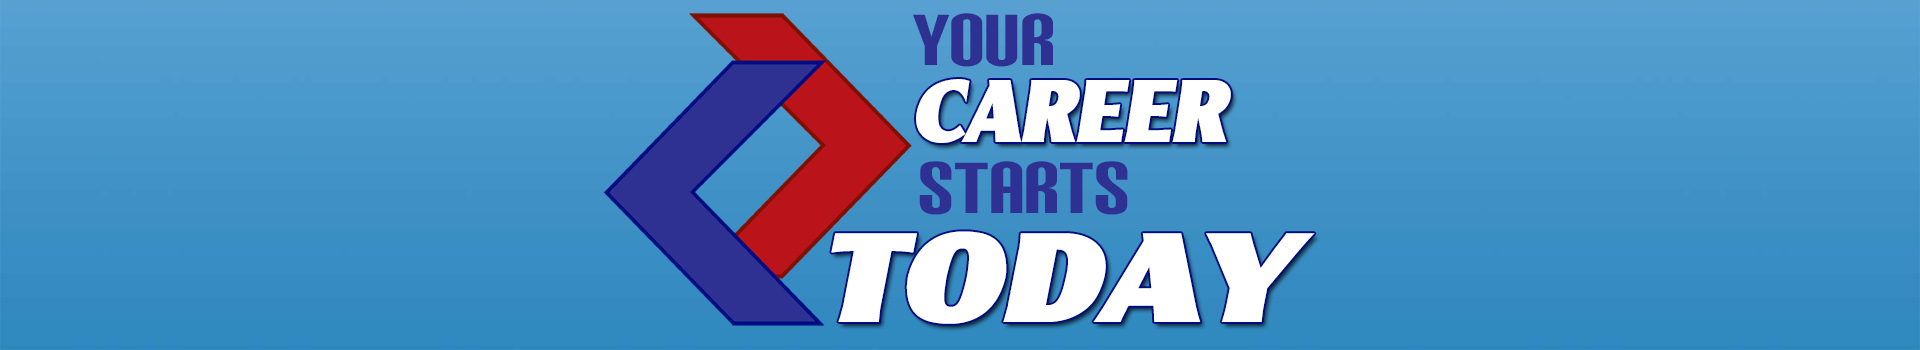 Your Career Starts Today!